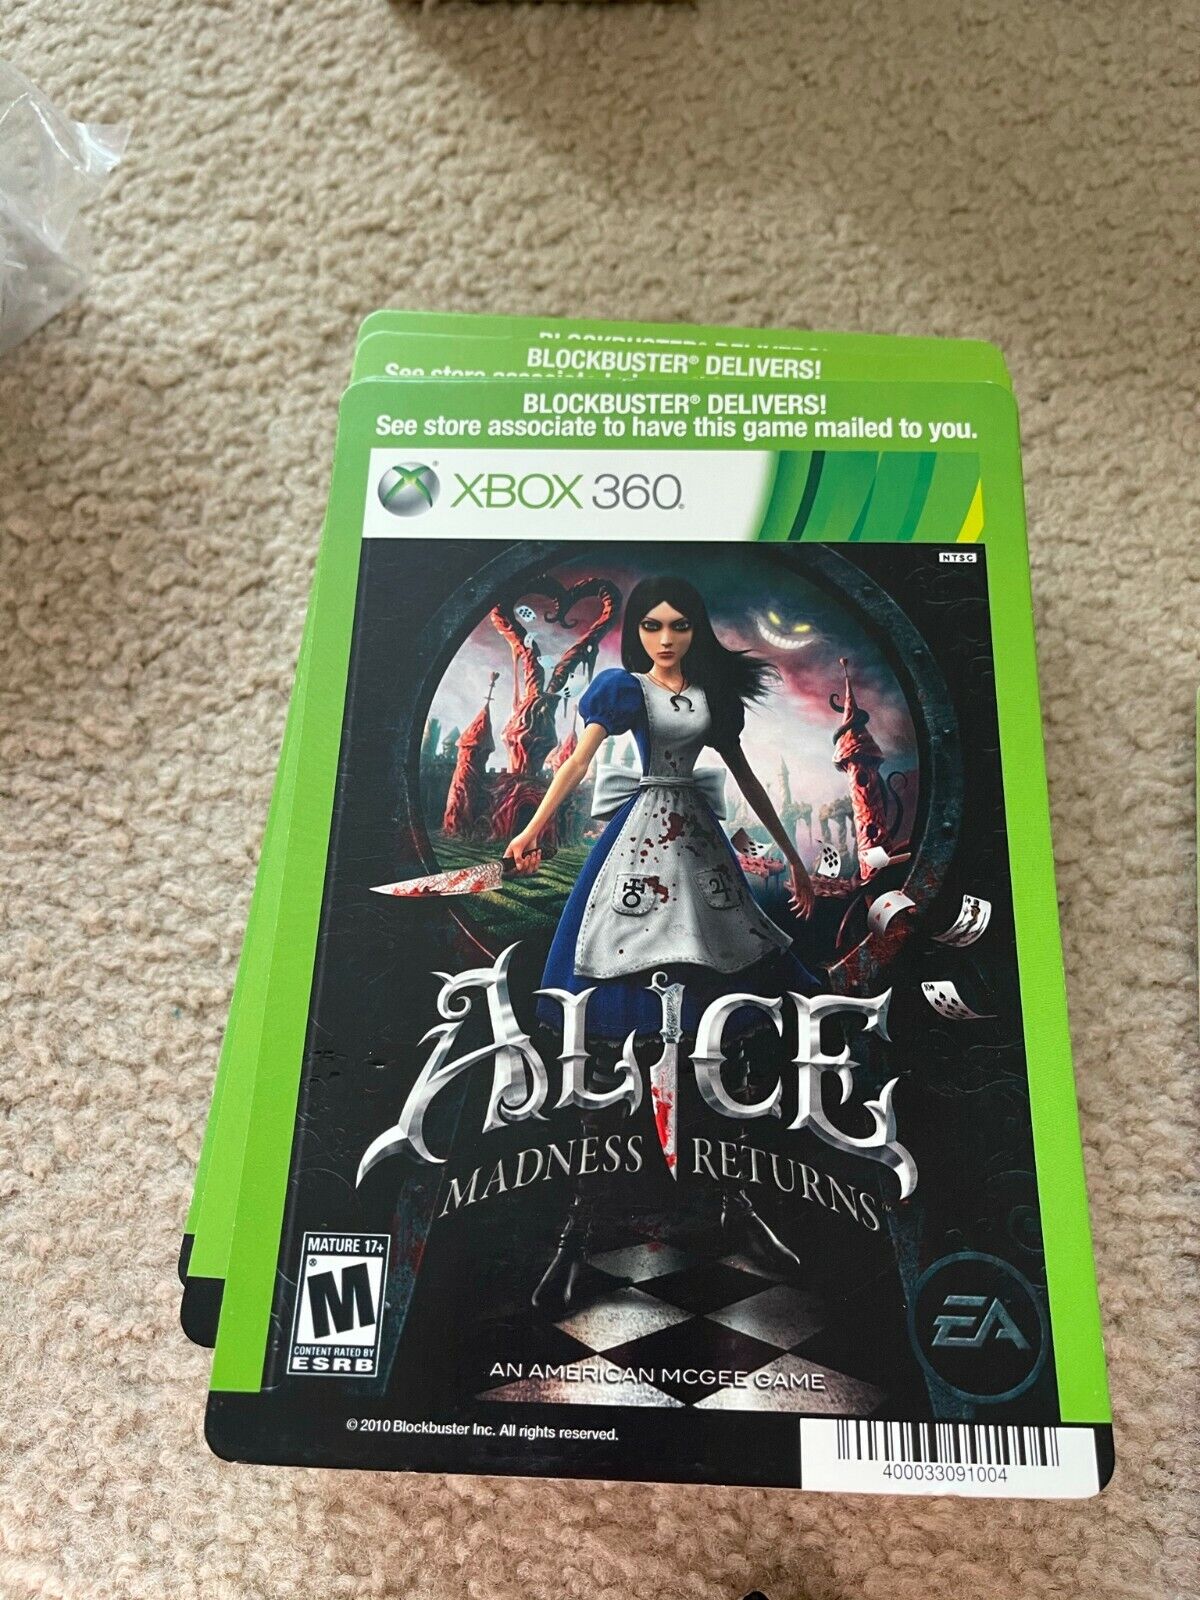 Alice Madness Returns Xbox 360 Blockbuster Backer Card 5x8 BACKER CARD ONLY